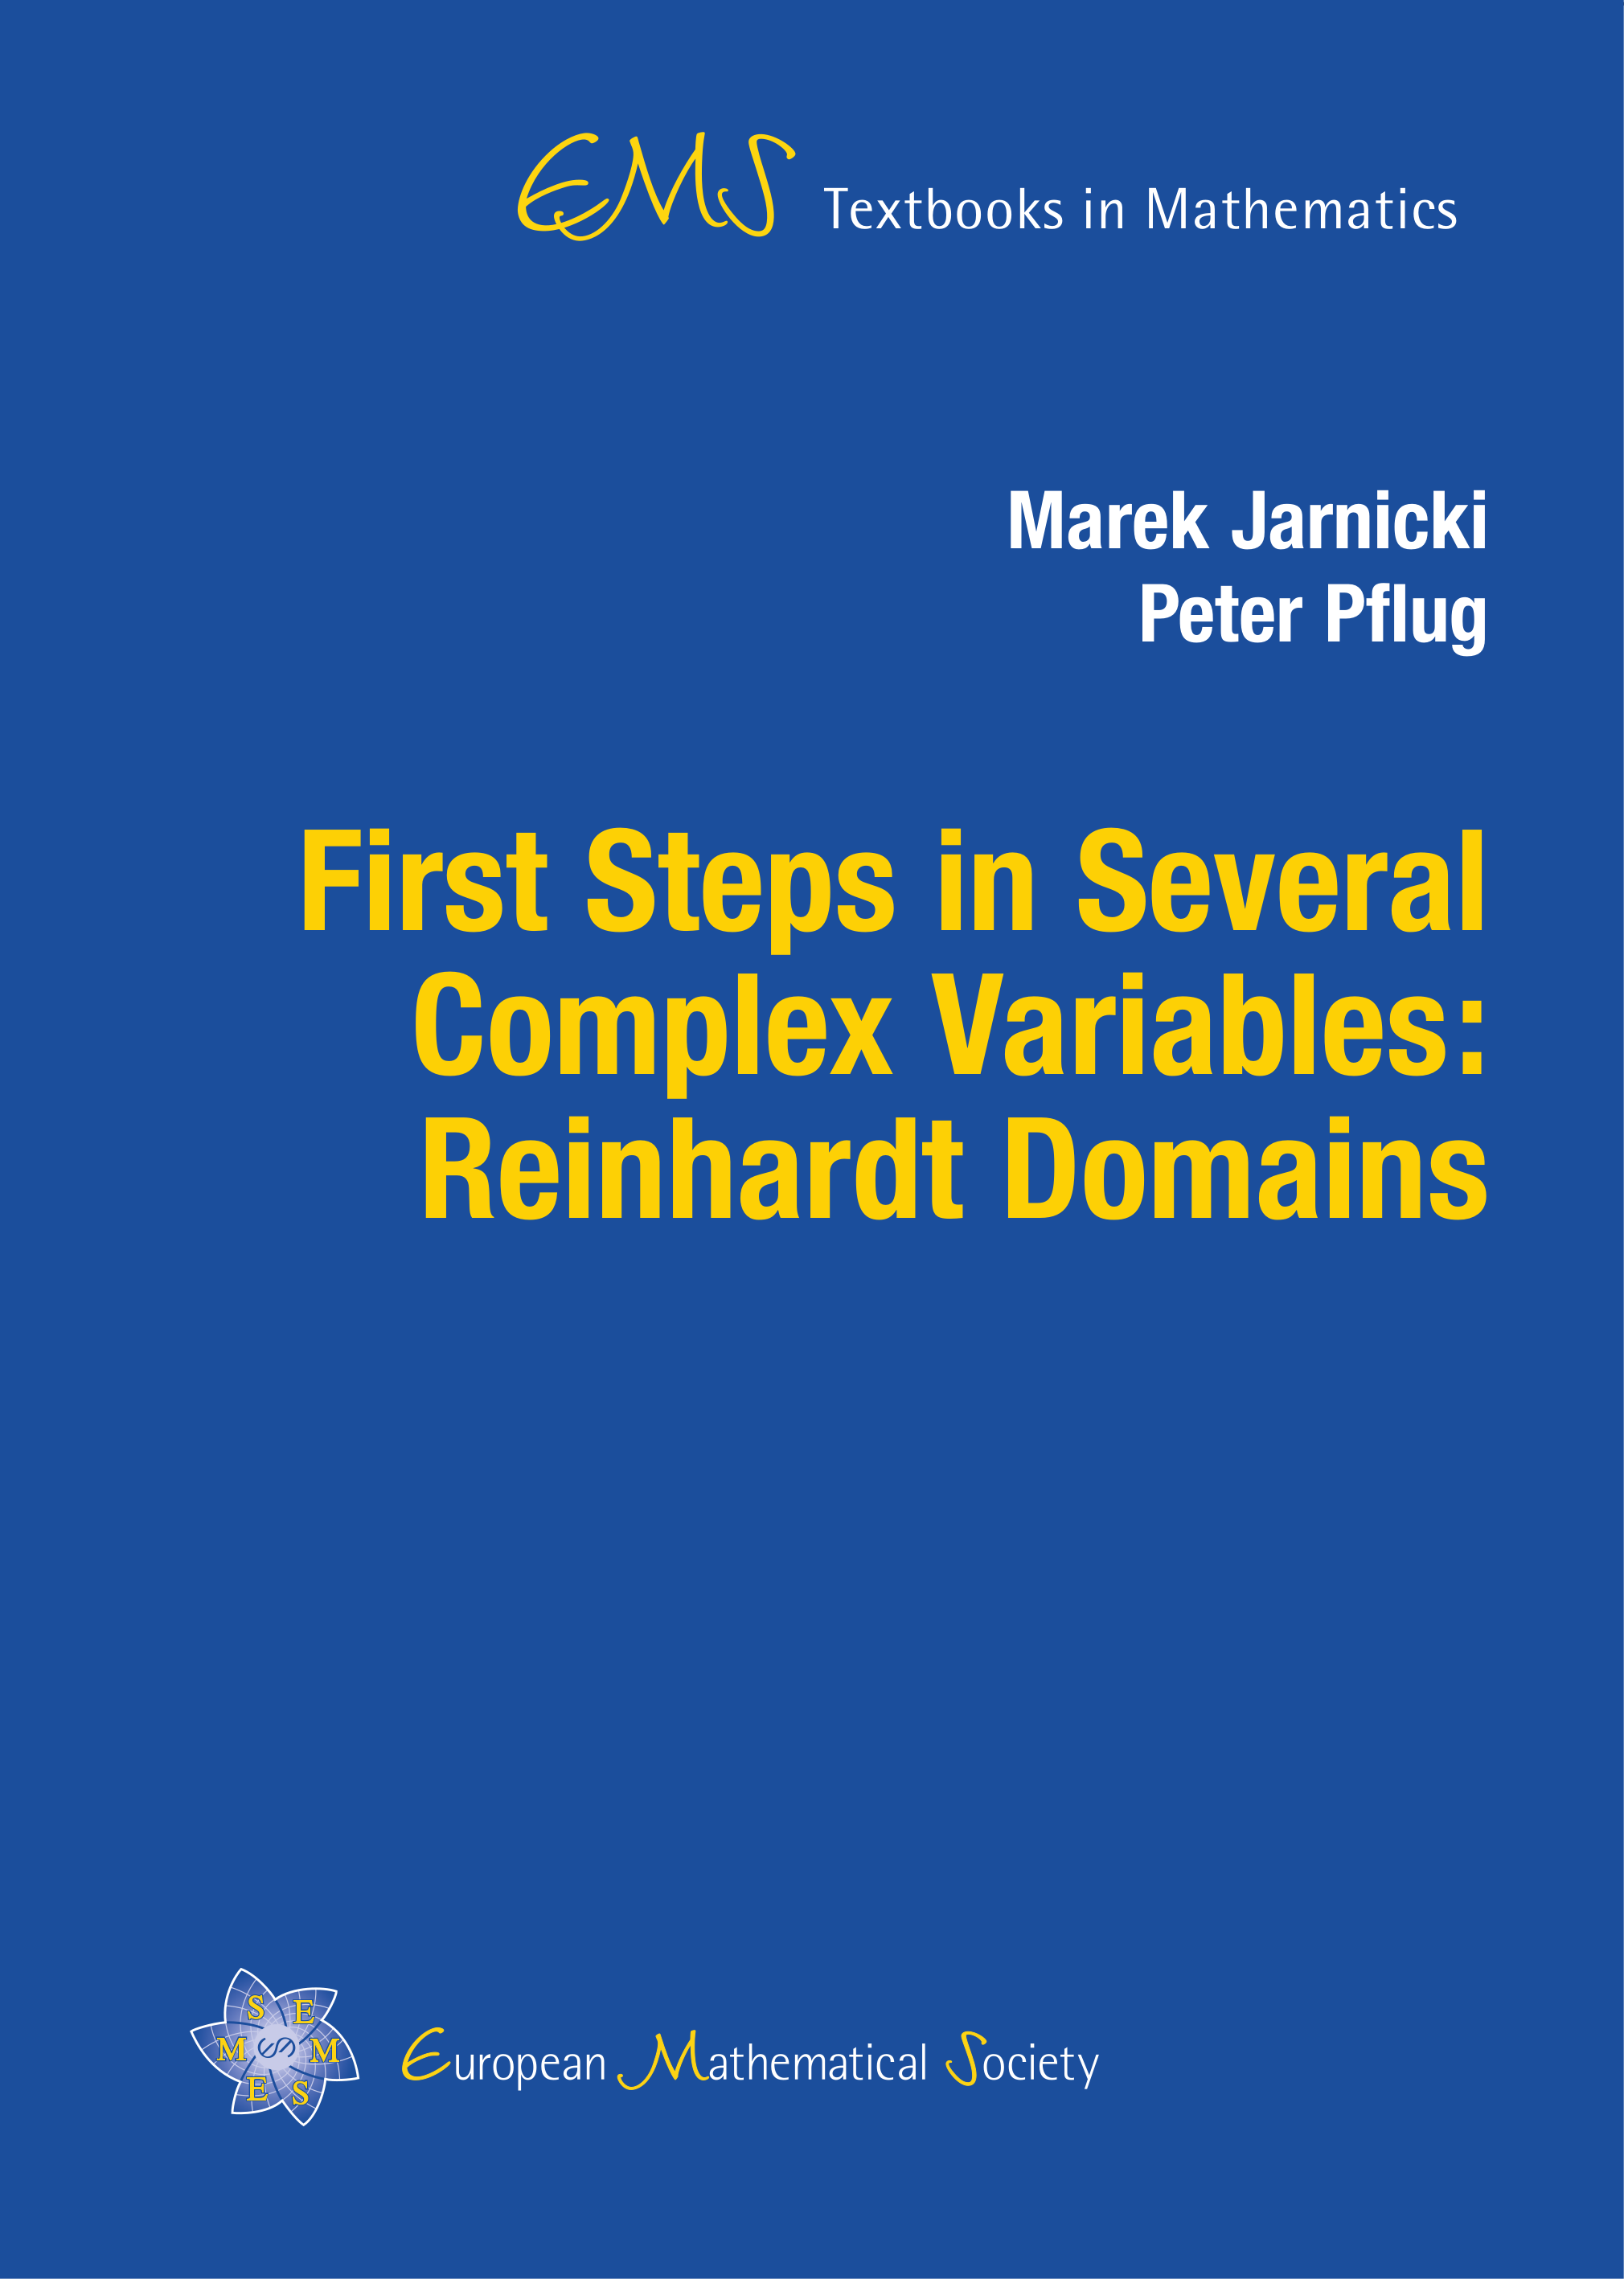 Holomorphically contractible families on Reinhardt domains cover